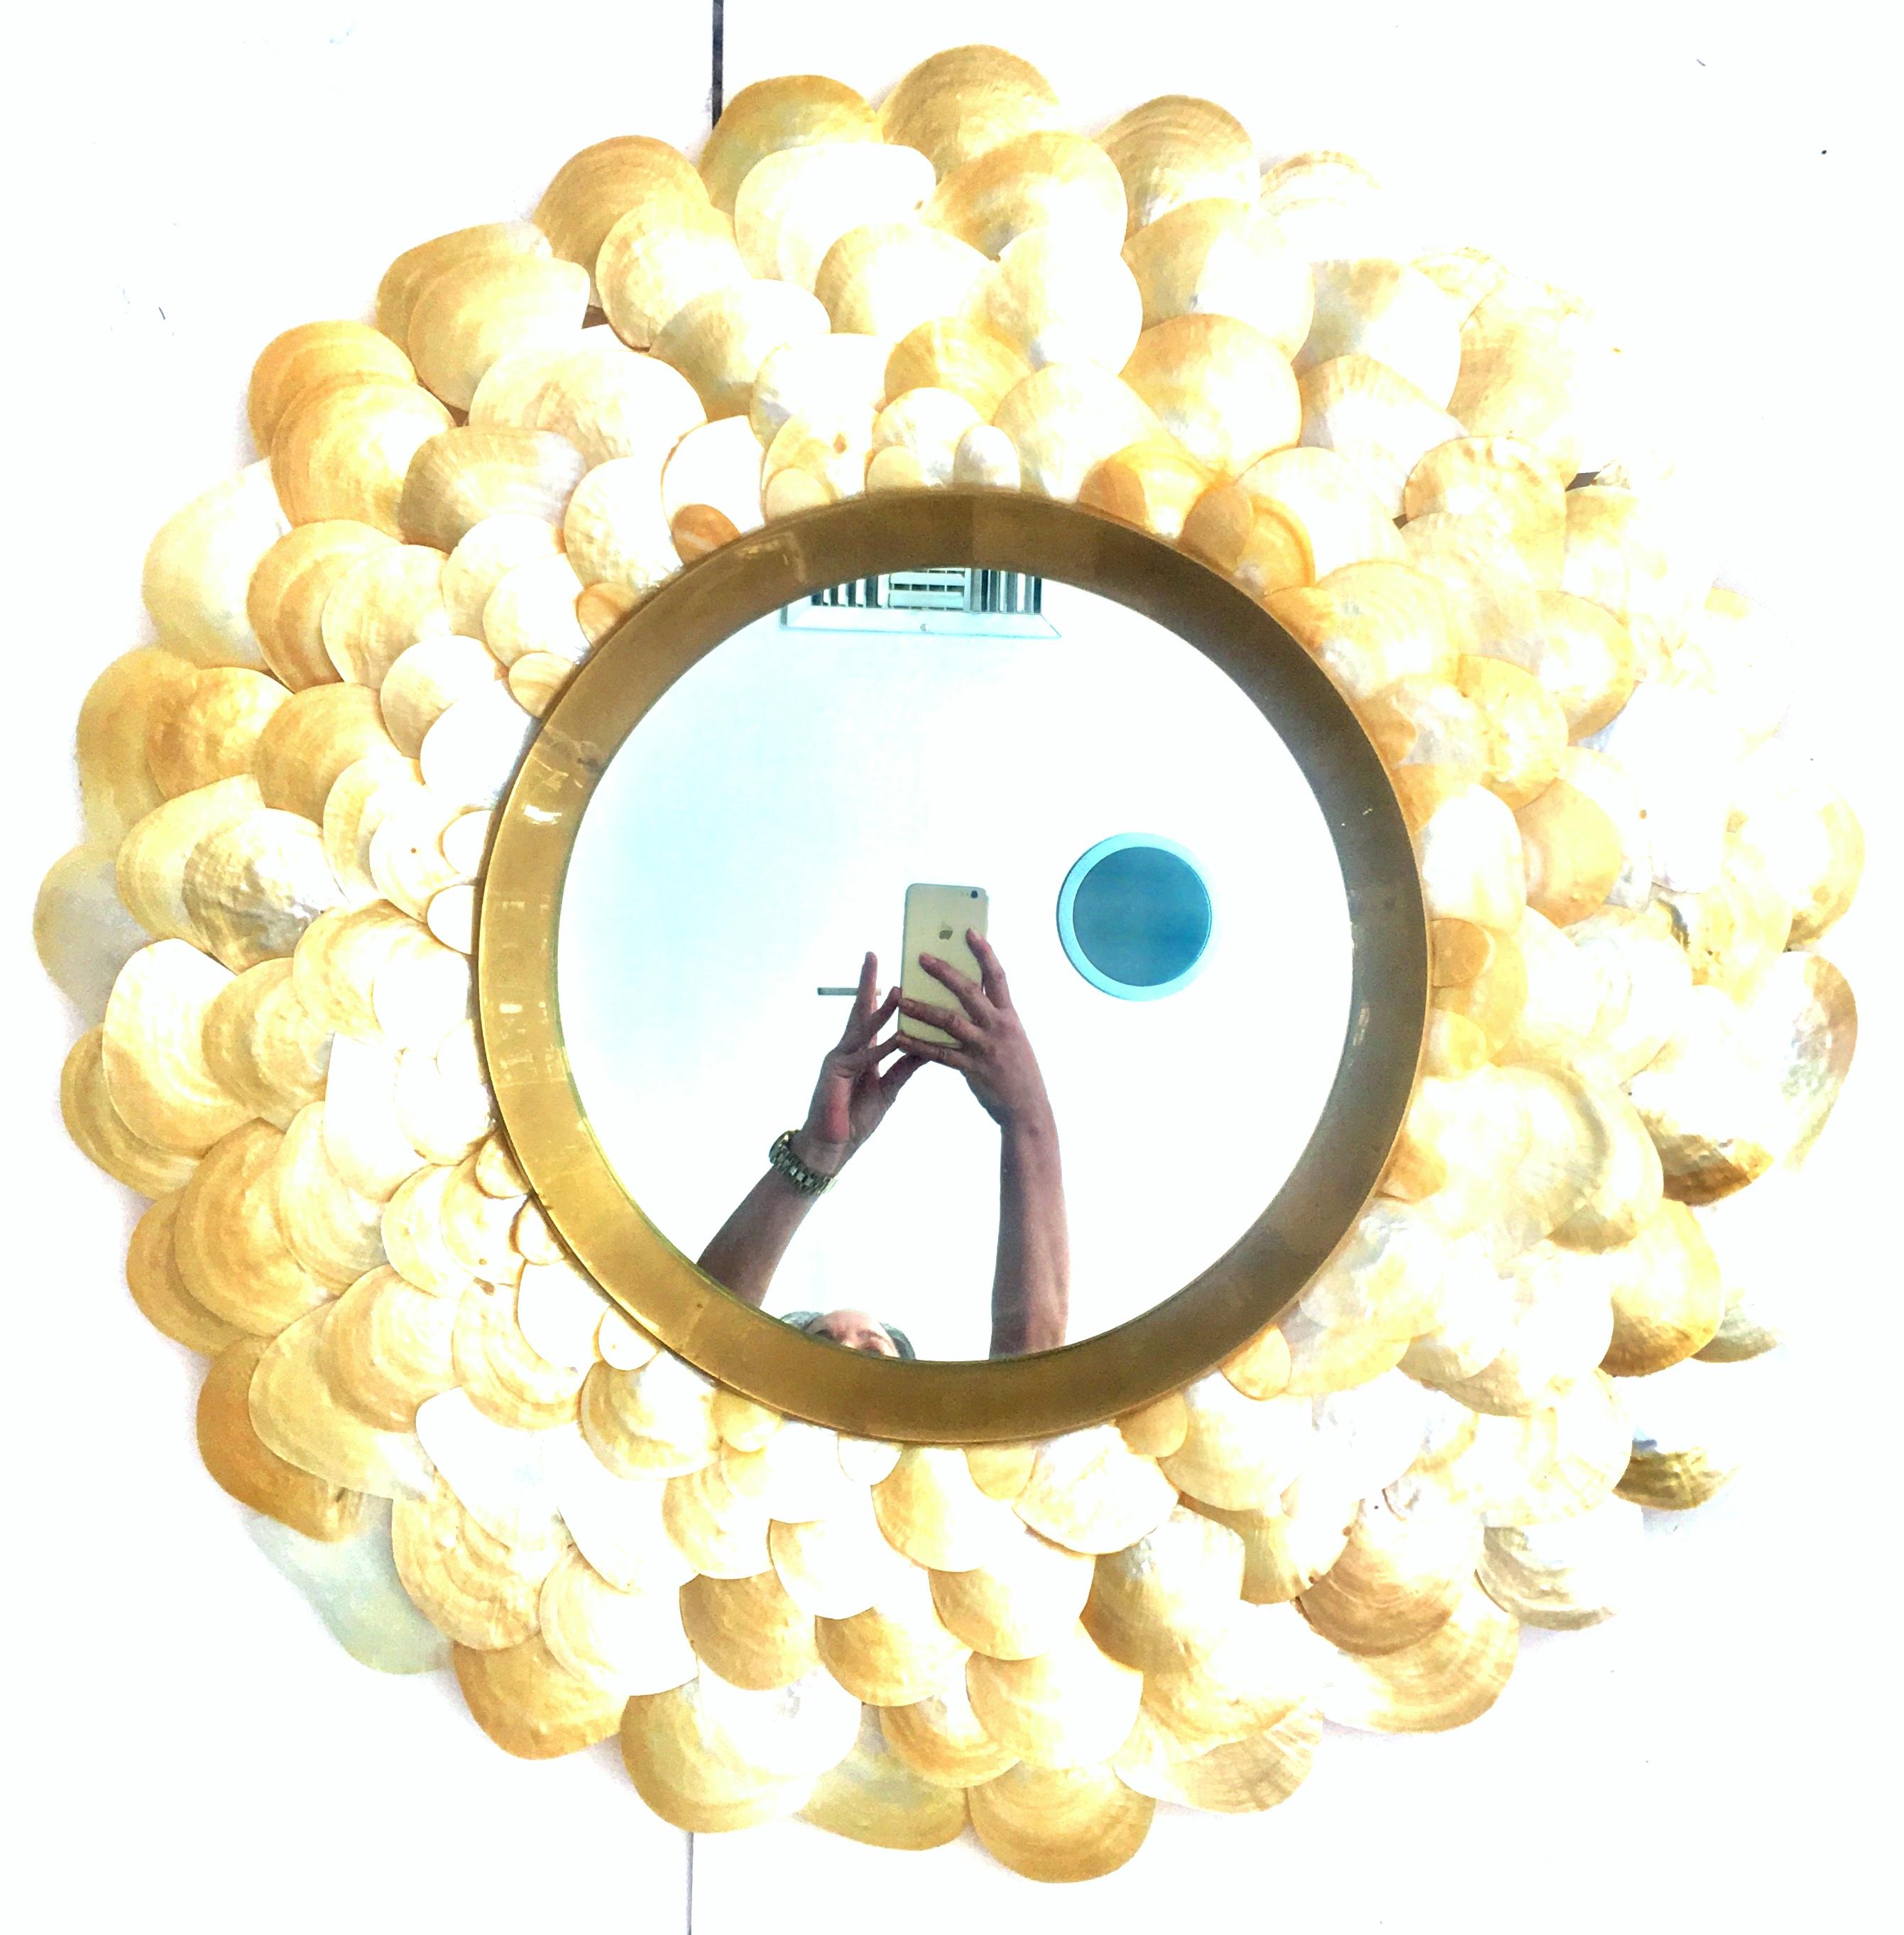 21st century sea shell and brass round convex hanging wall mirror. This dramatic substantial and classic piece of art features lacquered sea shells in a golden hue surrounding a solid brass framed convex mirror. The solid brass framed convex mirror